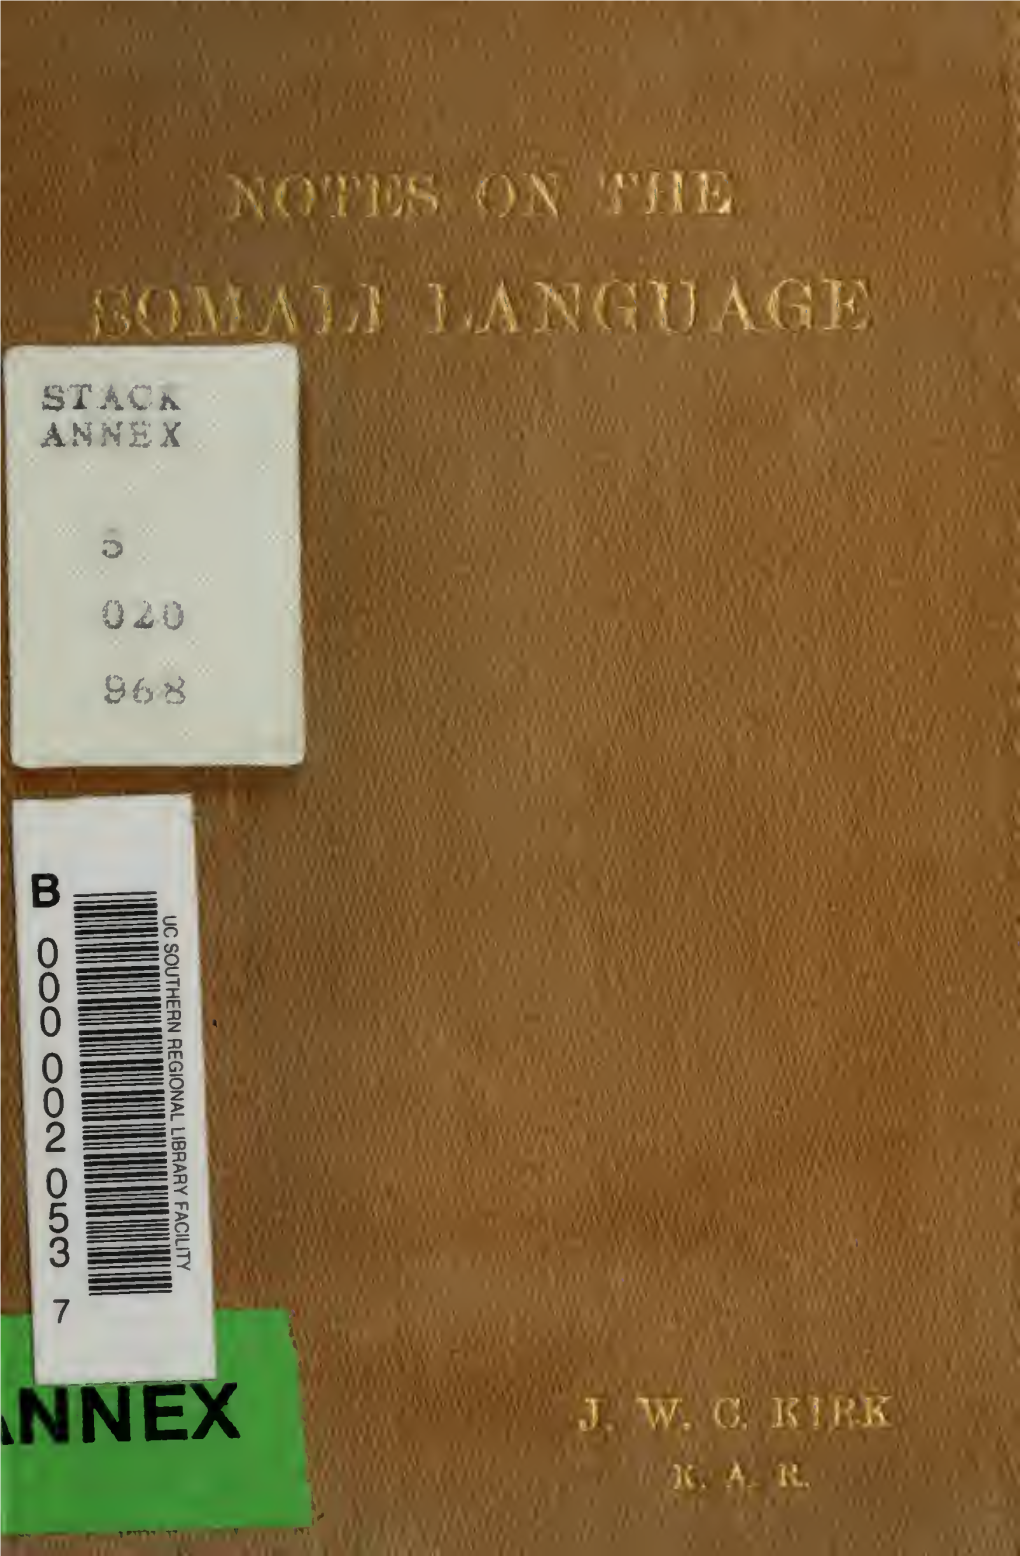 Notes on the Somali Language : with Examples of Phrases